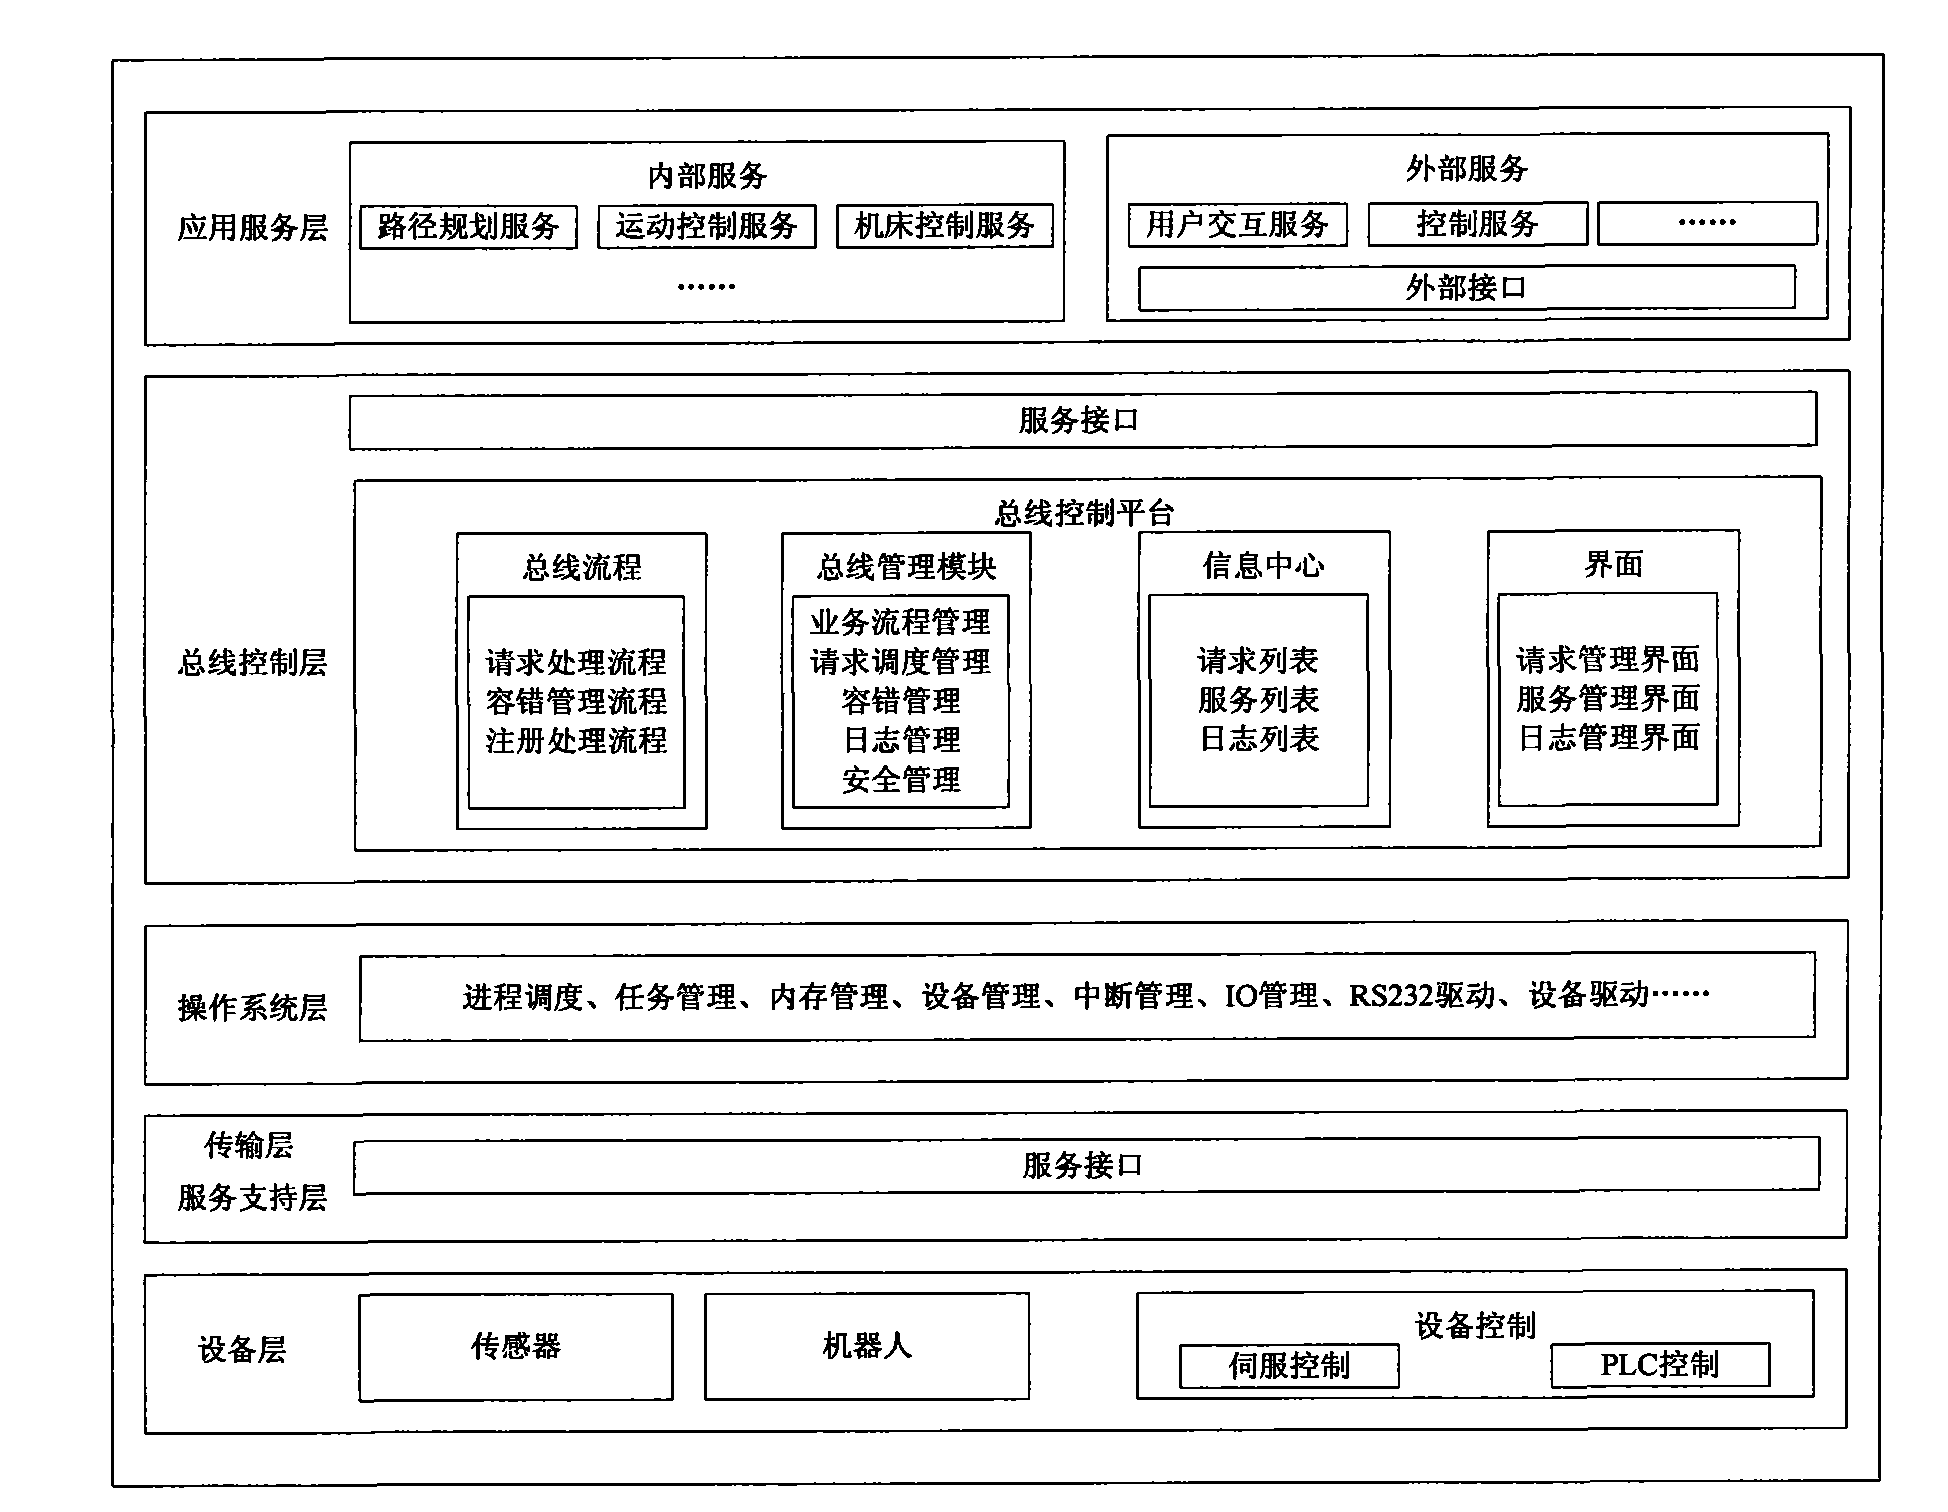 Open type control method based on lightweight service-oriented architectures (LSOA) framework